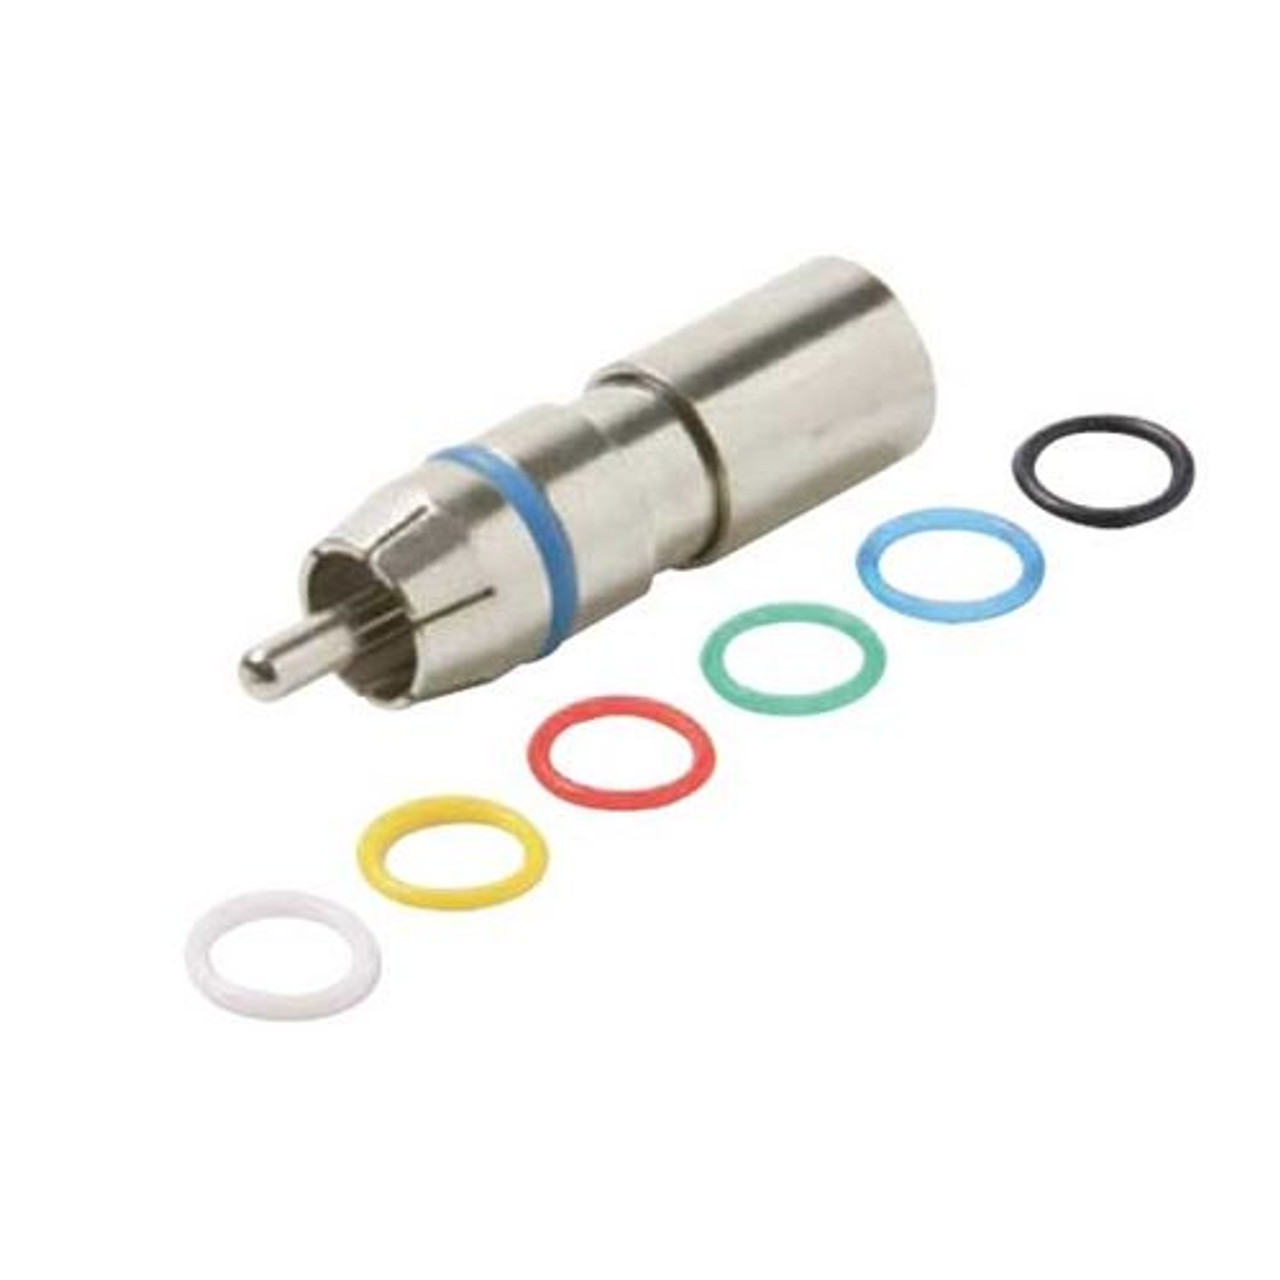 Steren 200-069-10 RCA PermaSeal II Mini RG59 Coaxial Compression Connector 10 Pack 360 Degree Connect Nickel Plated Brass 6-Color Bands Audio Video Perma Seal II RG-59 A/V Connectors, Part # 200-069-10